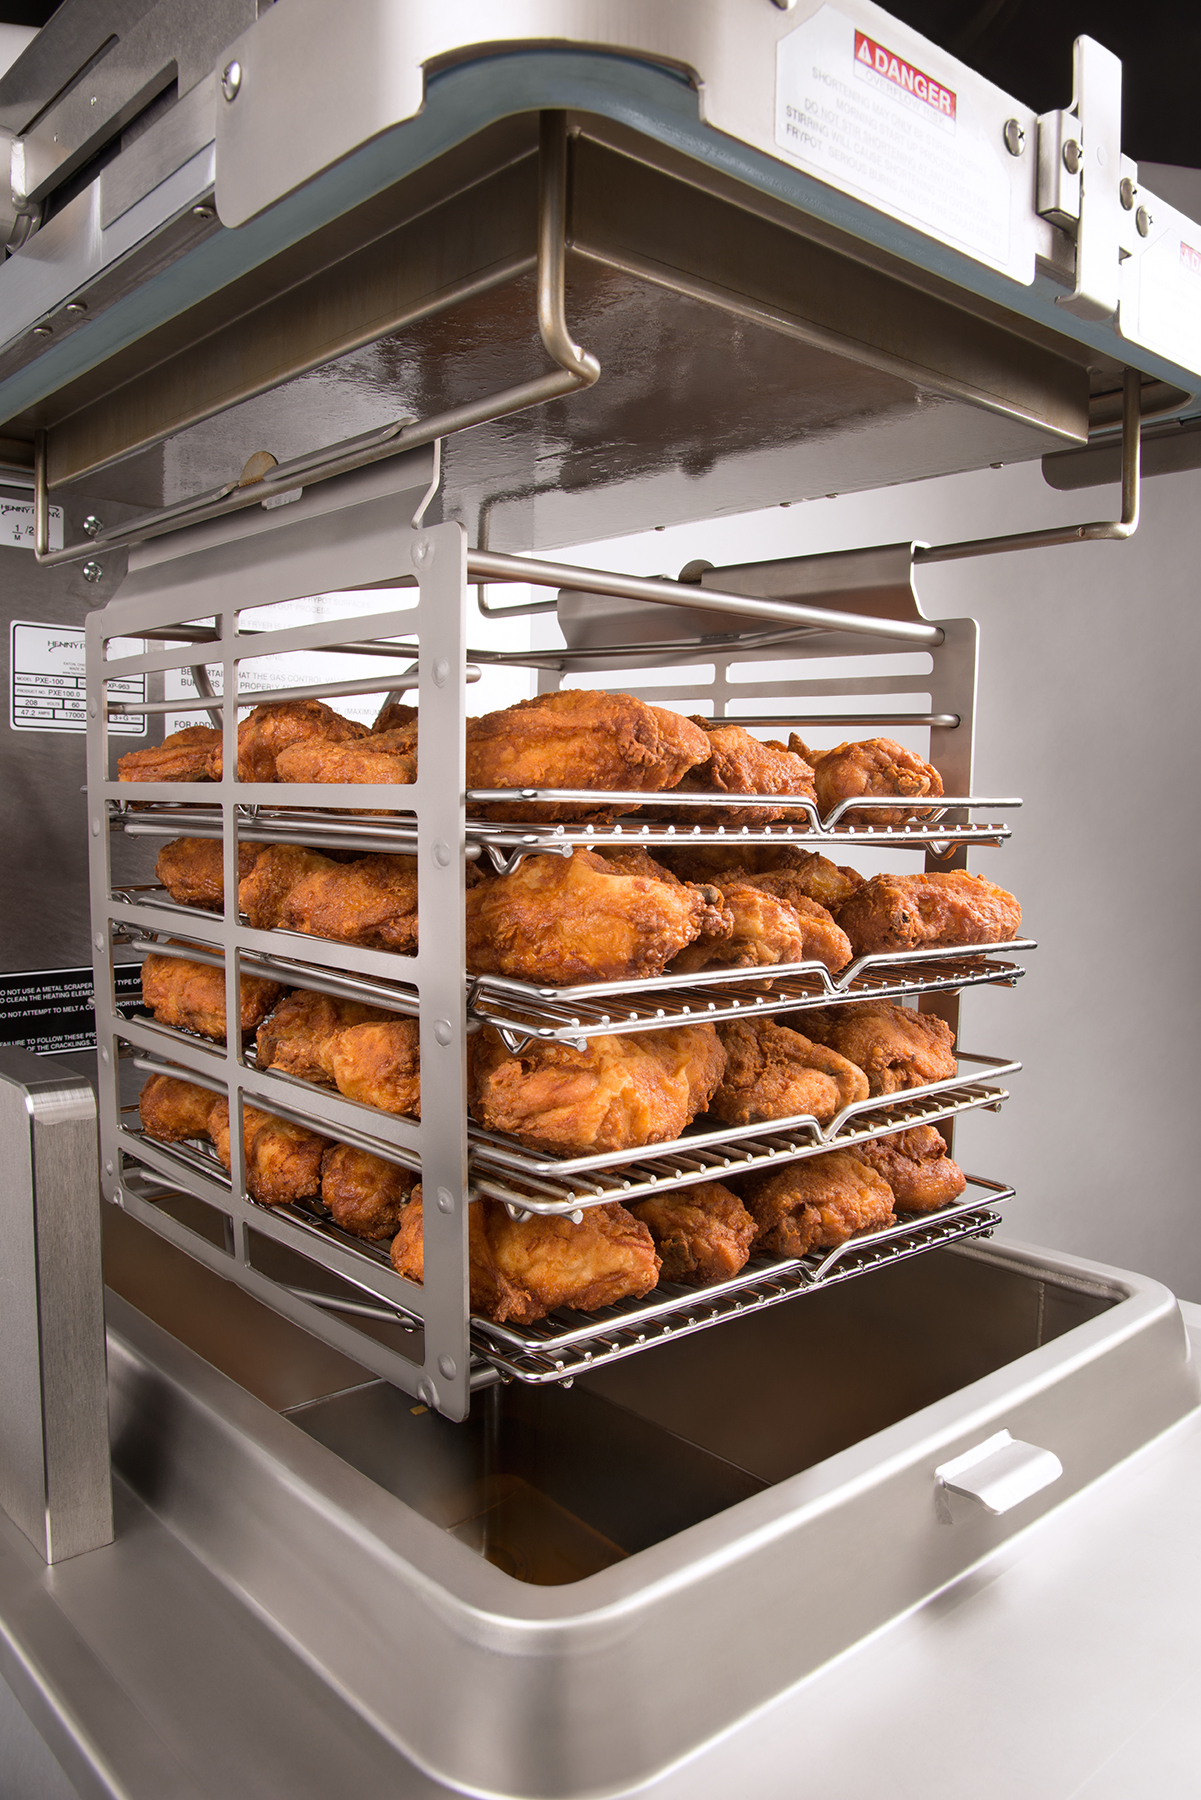 Commercial Chicken Fryers by Henny Penny for Sale in California and Minnesota